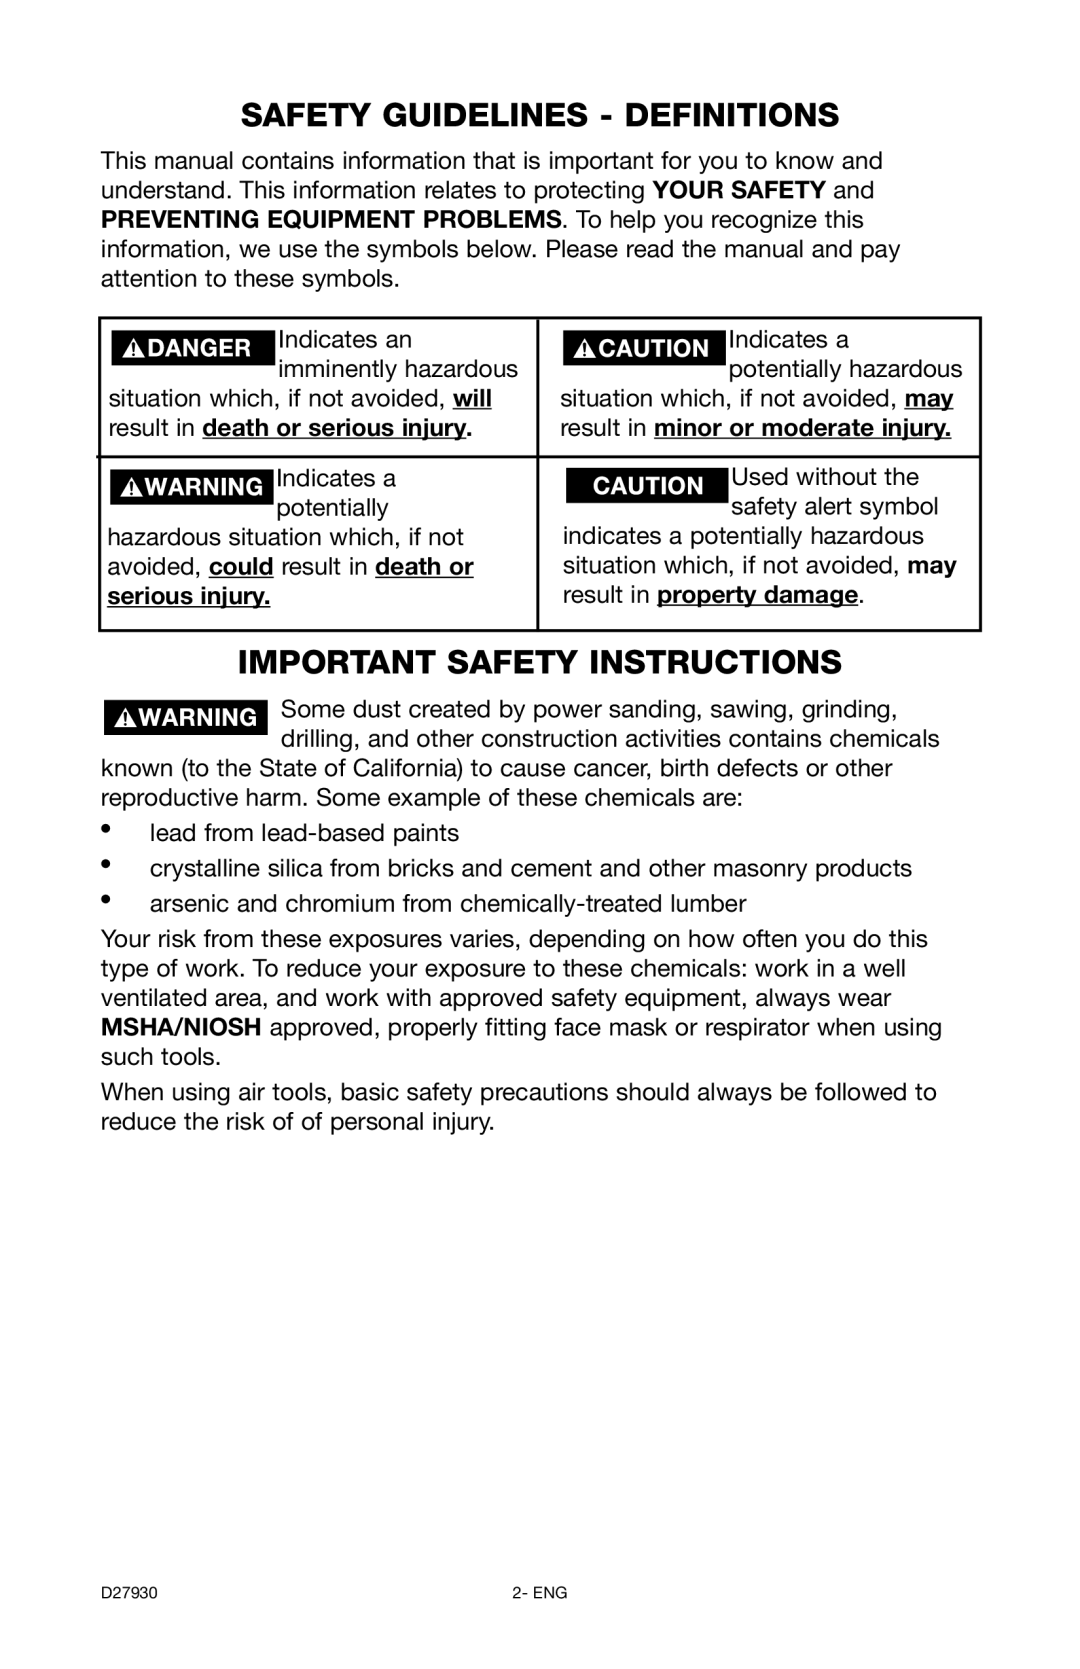 Delta CP200, D27930 Safety Guidelines - Definitions, Important Safety Instructions, result in death or serious injury 